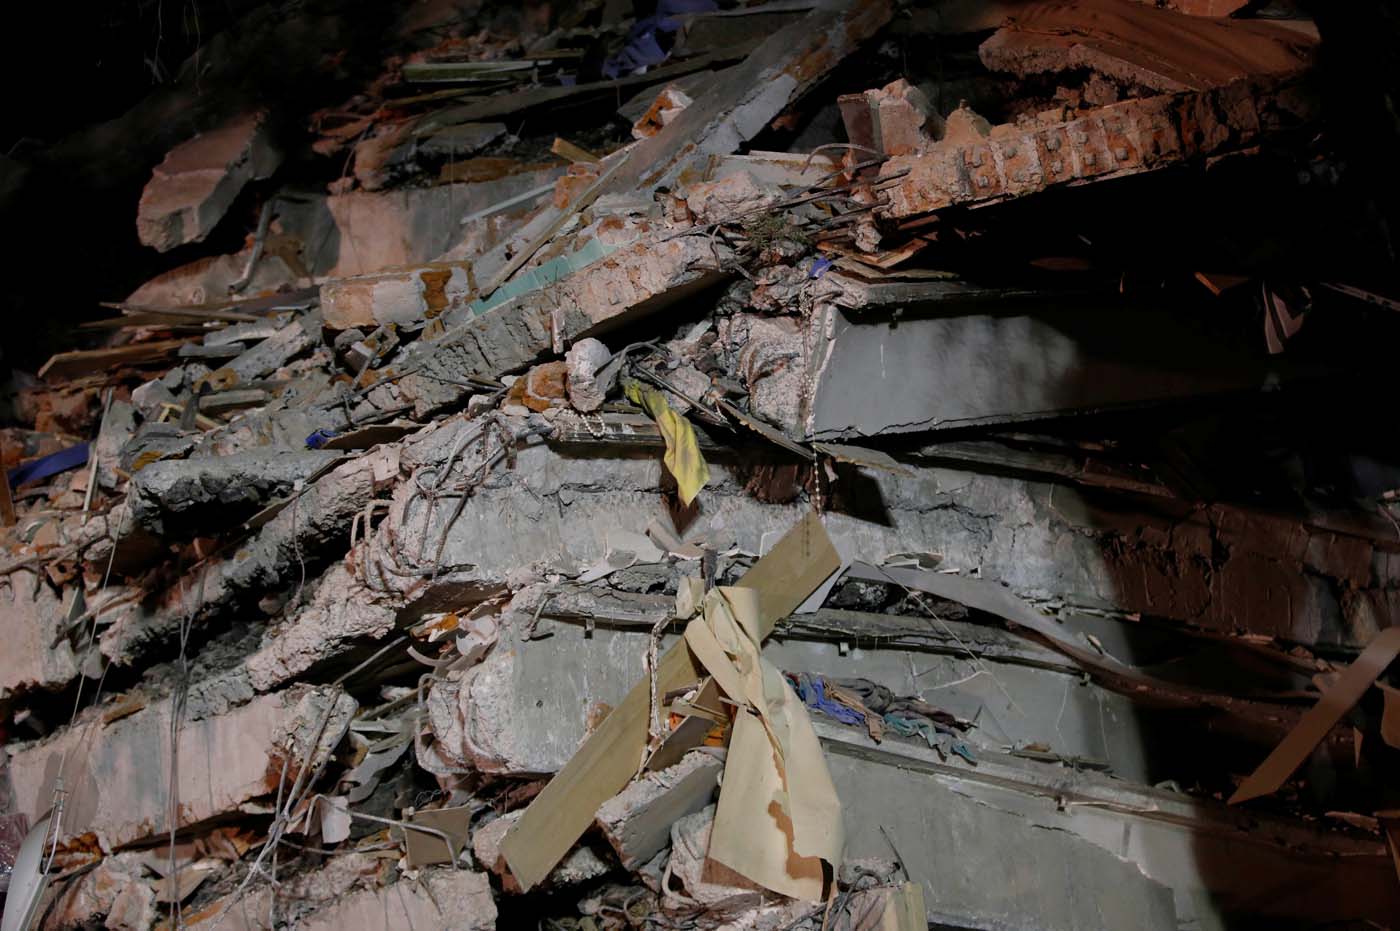 Debris are pictured at the site of a collapsed building after an earthquake in Mexico City, Mexico September 20, 2017. REUTERS/Henry Romero